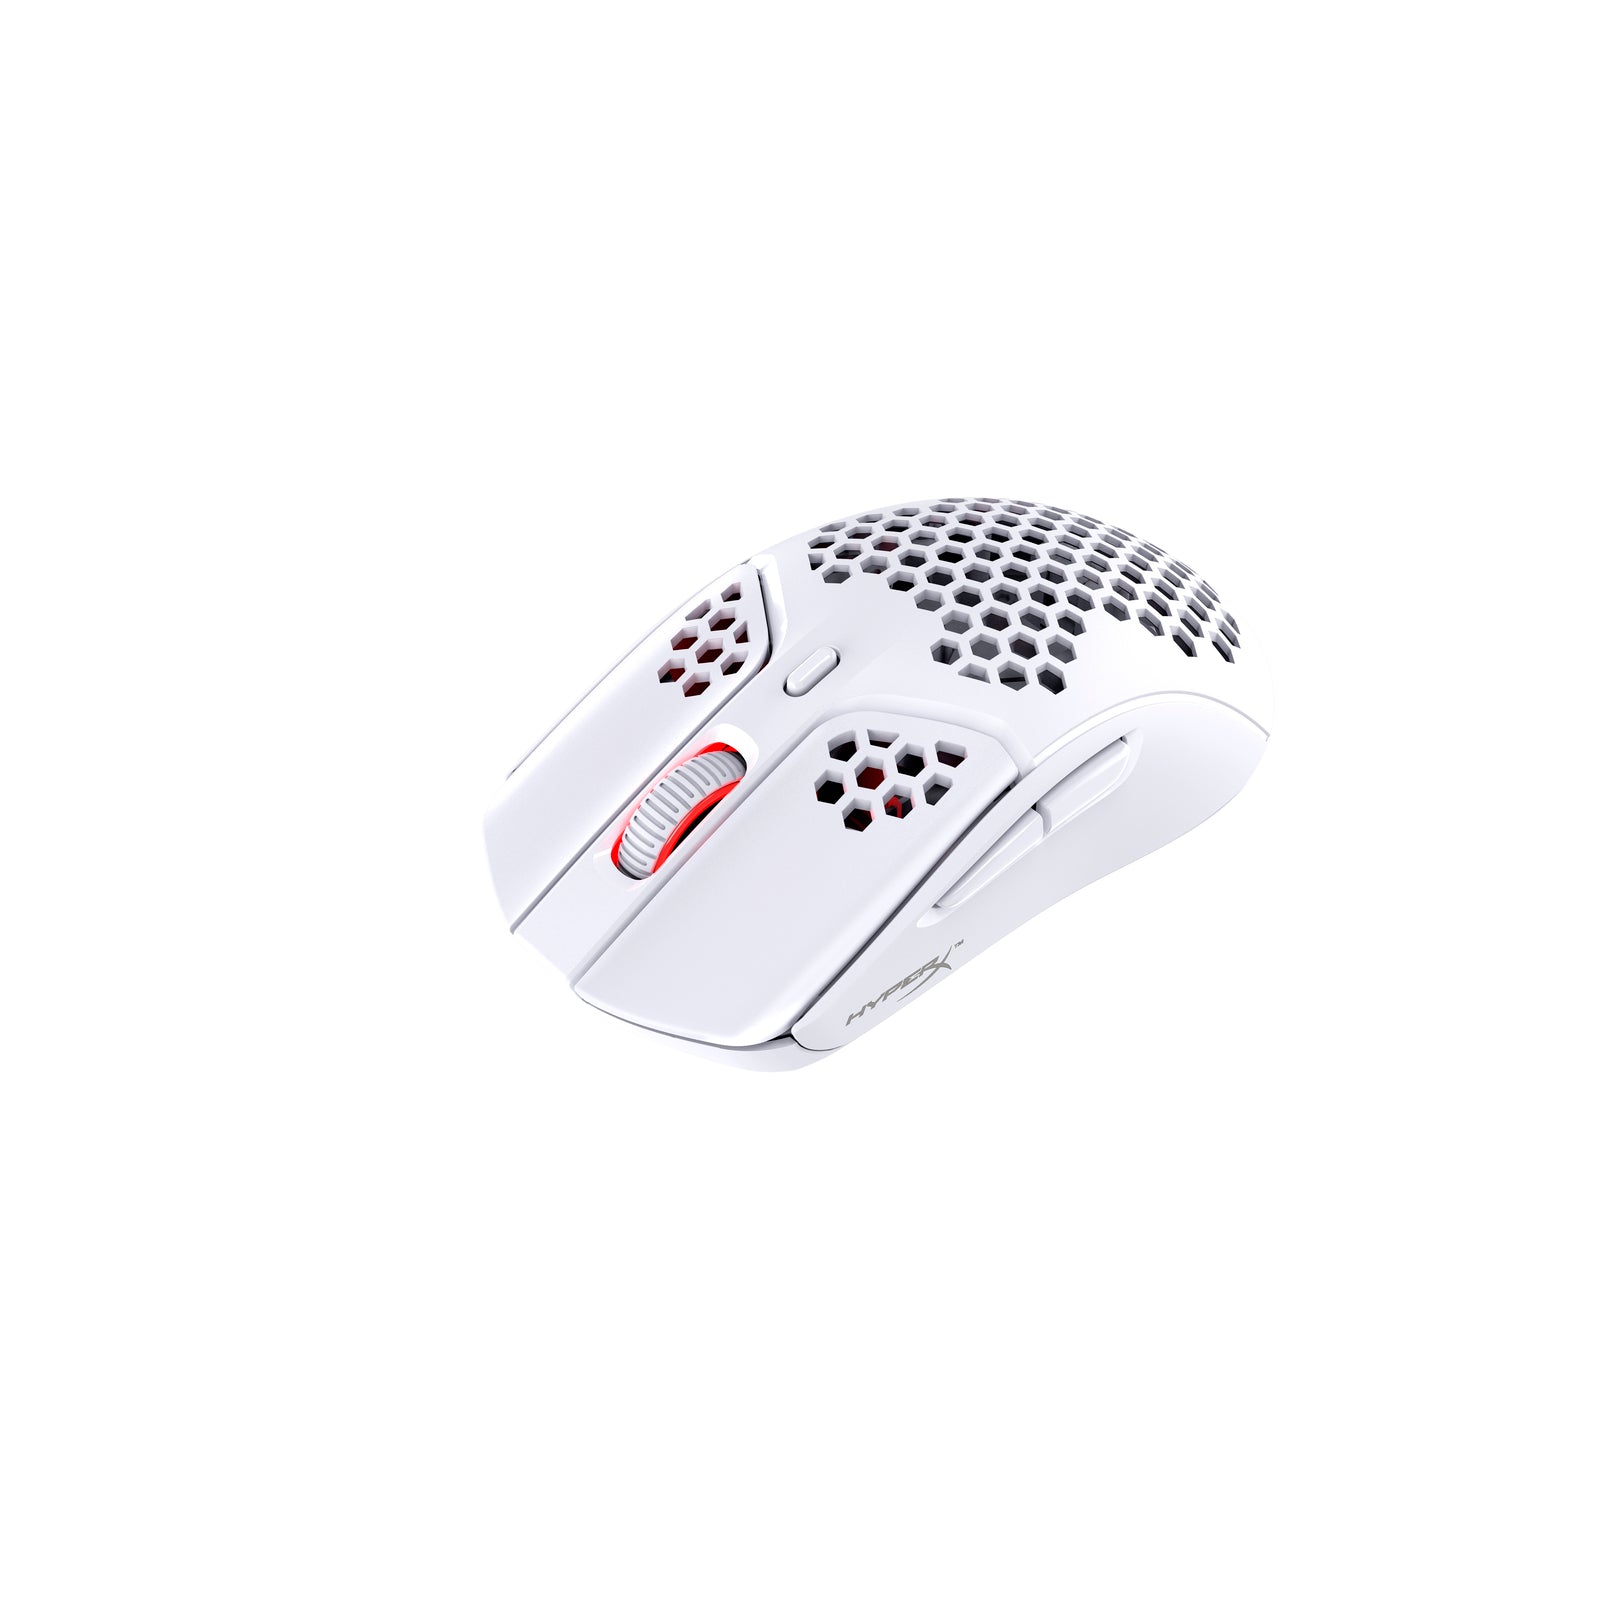 HyperX Pulsefire Haste Wireless White, pointing left - down, view from above